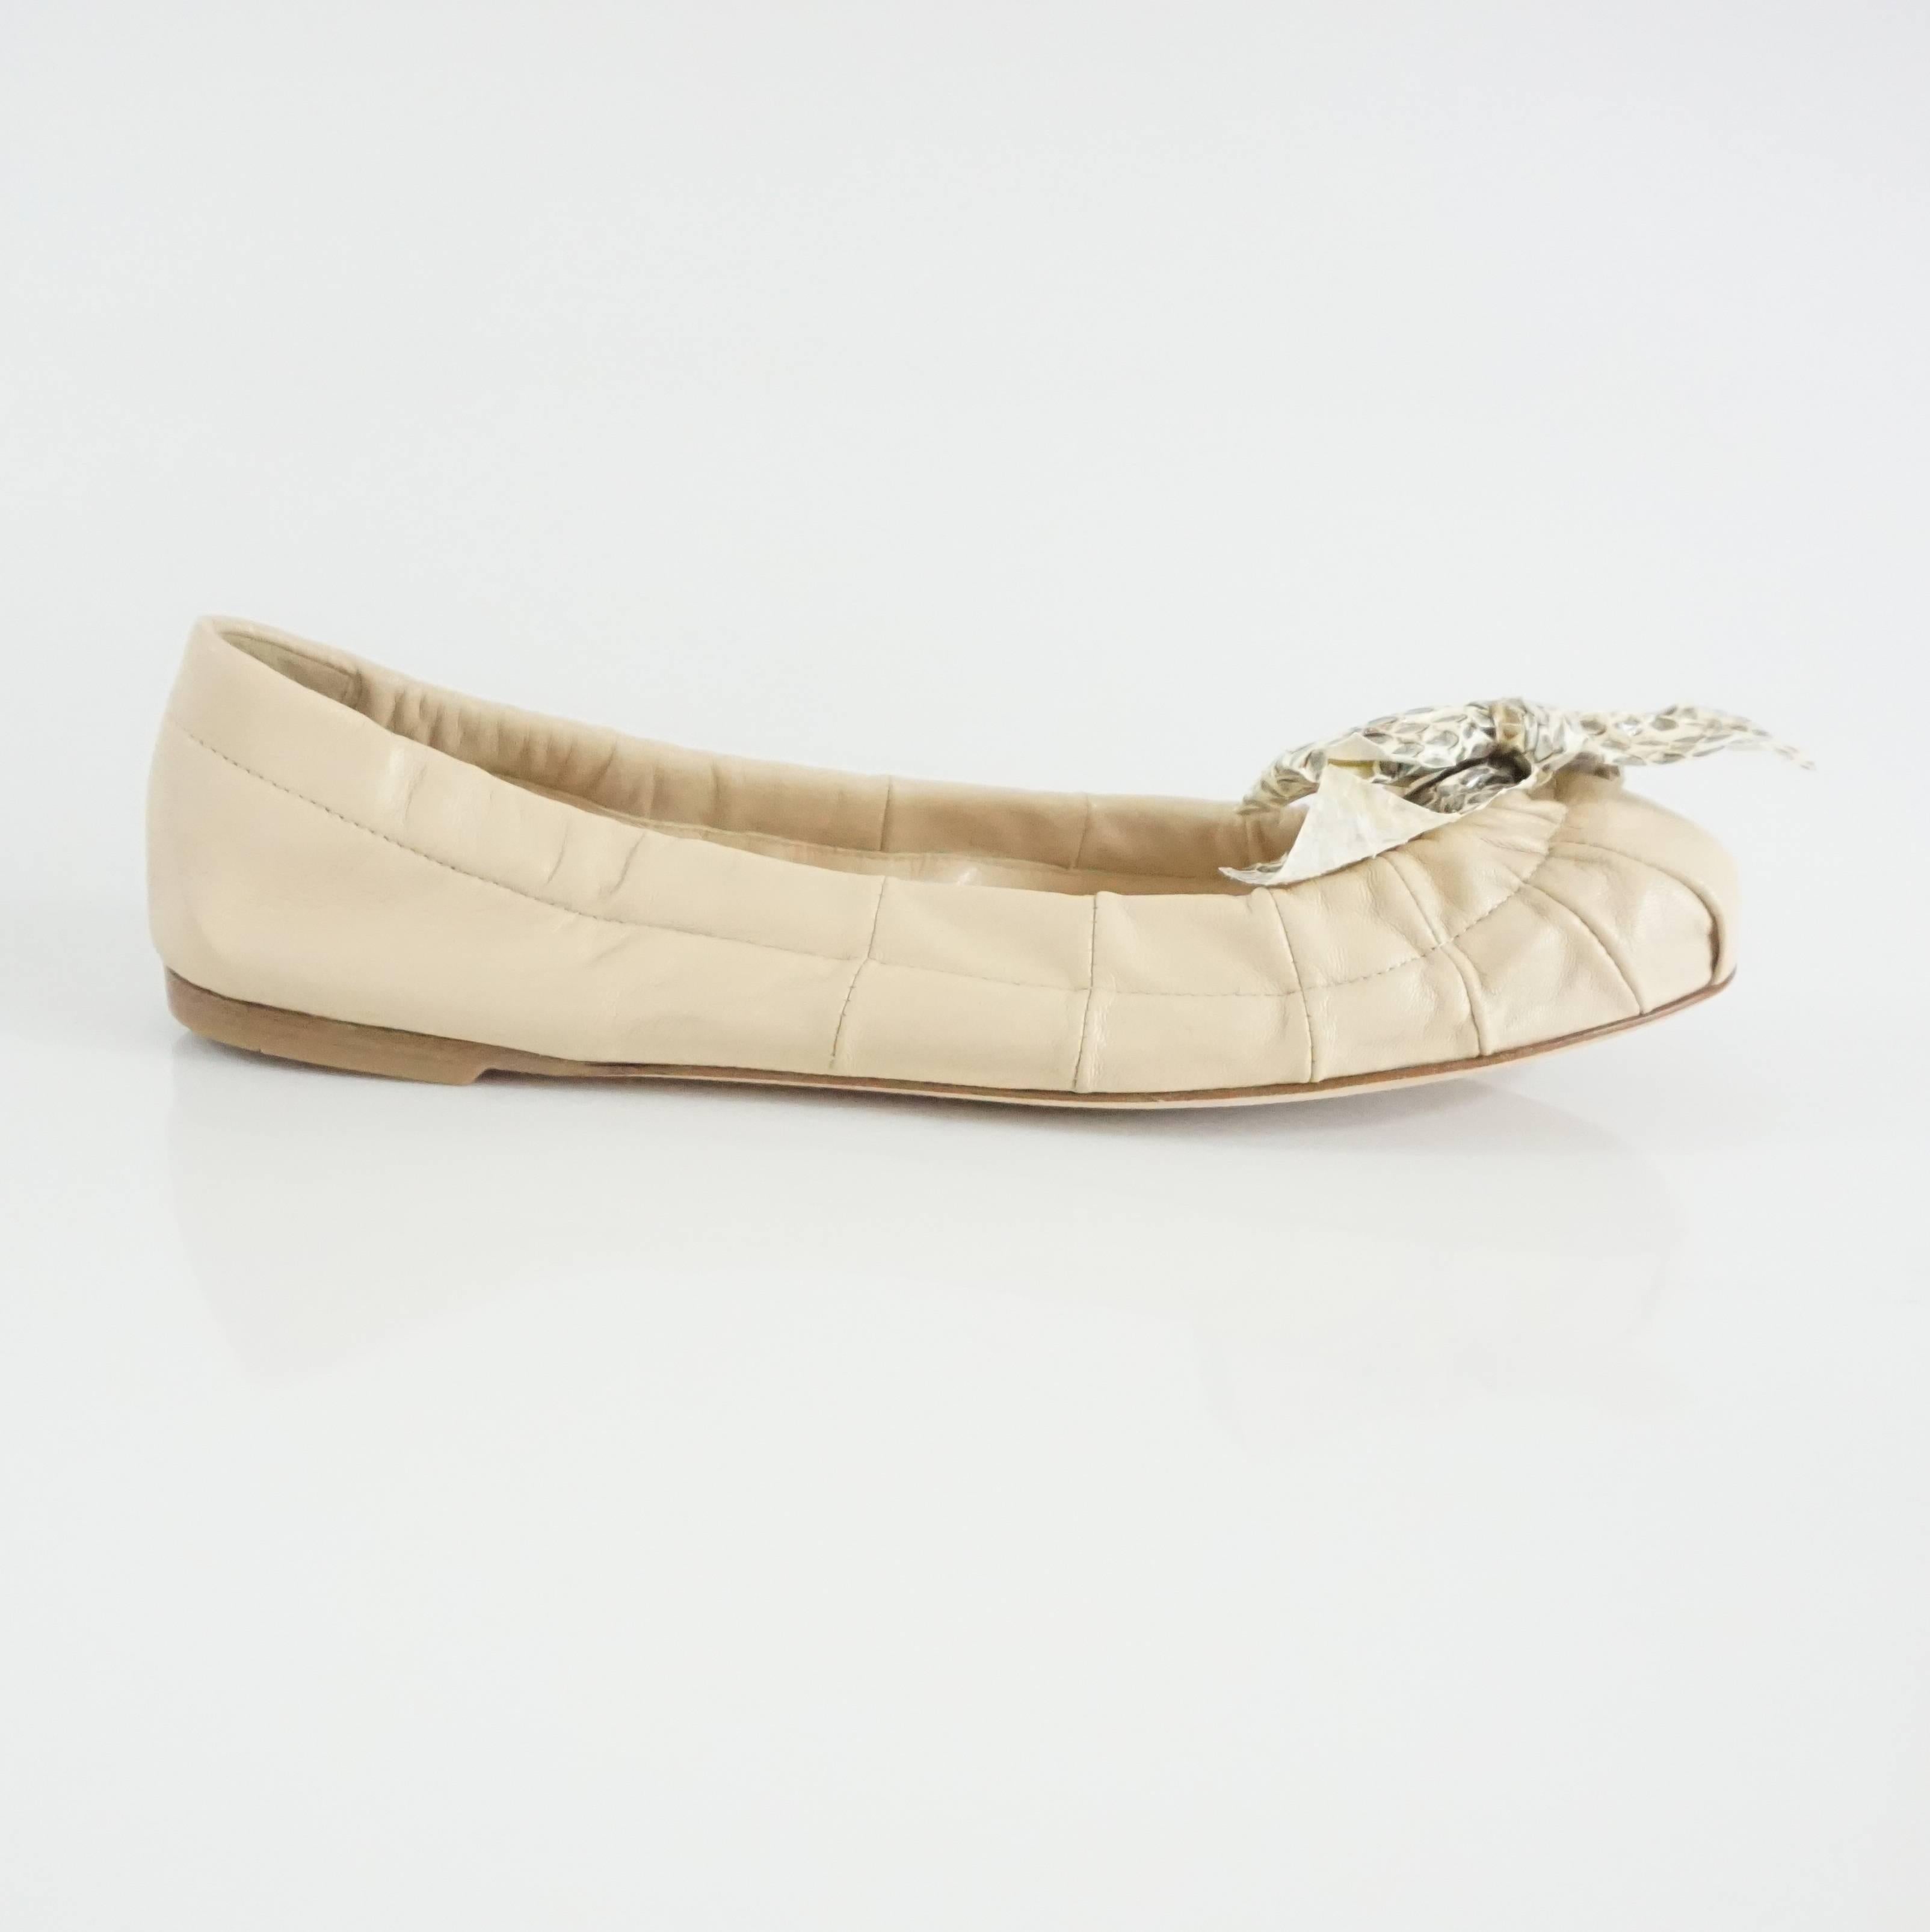 These Prada flats are cream leather. The feature snake skin bows. These flats are in excellent condition with minor wear on one of the bows. Size 38. 
